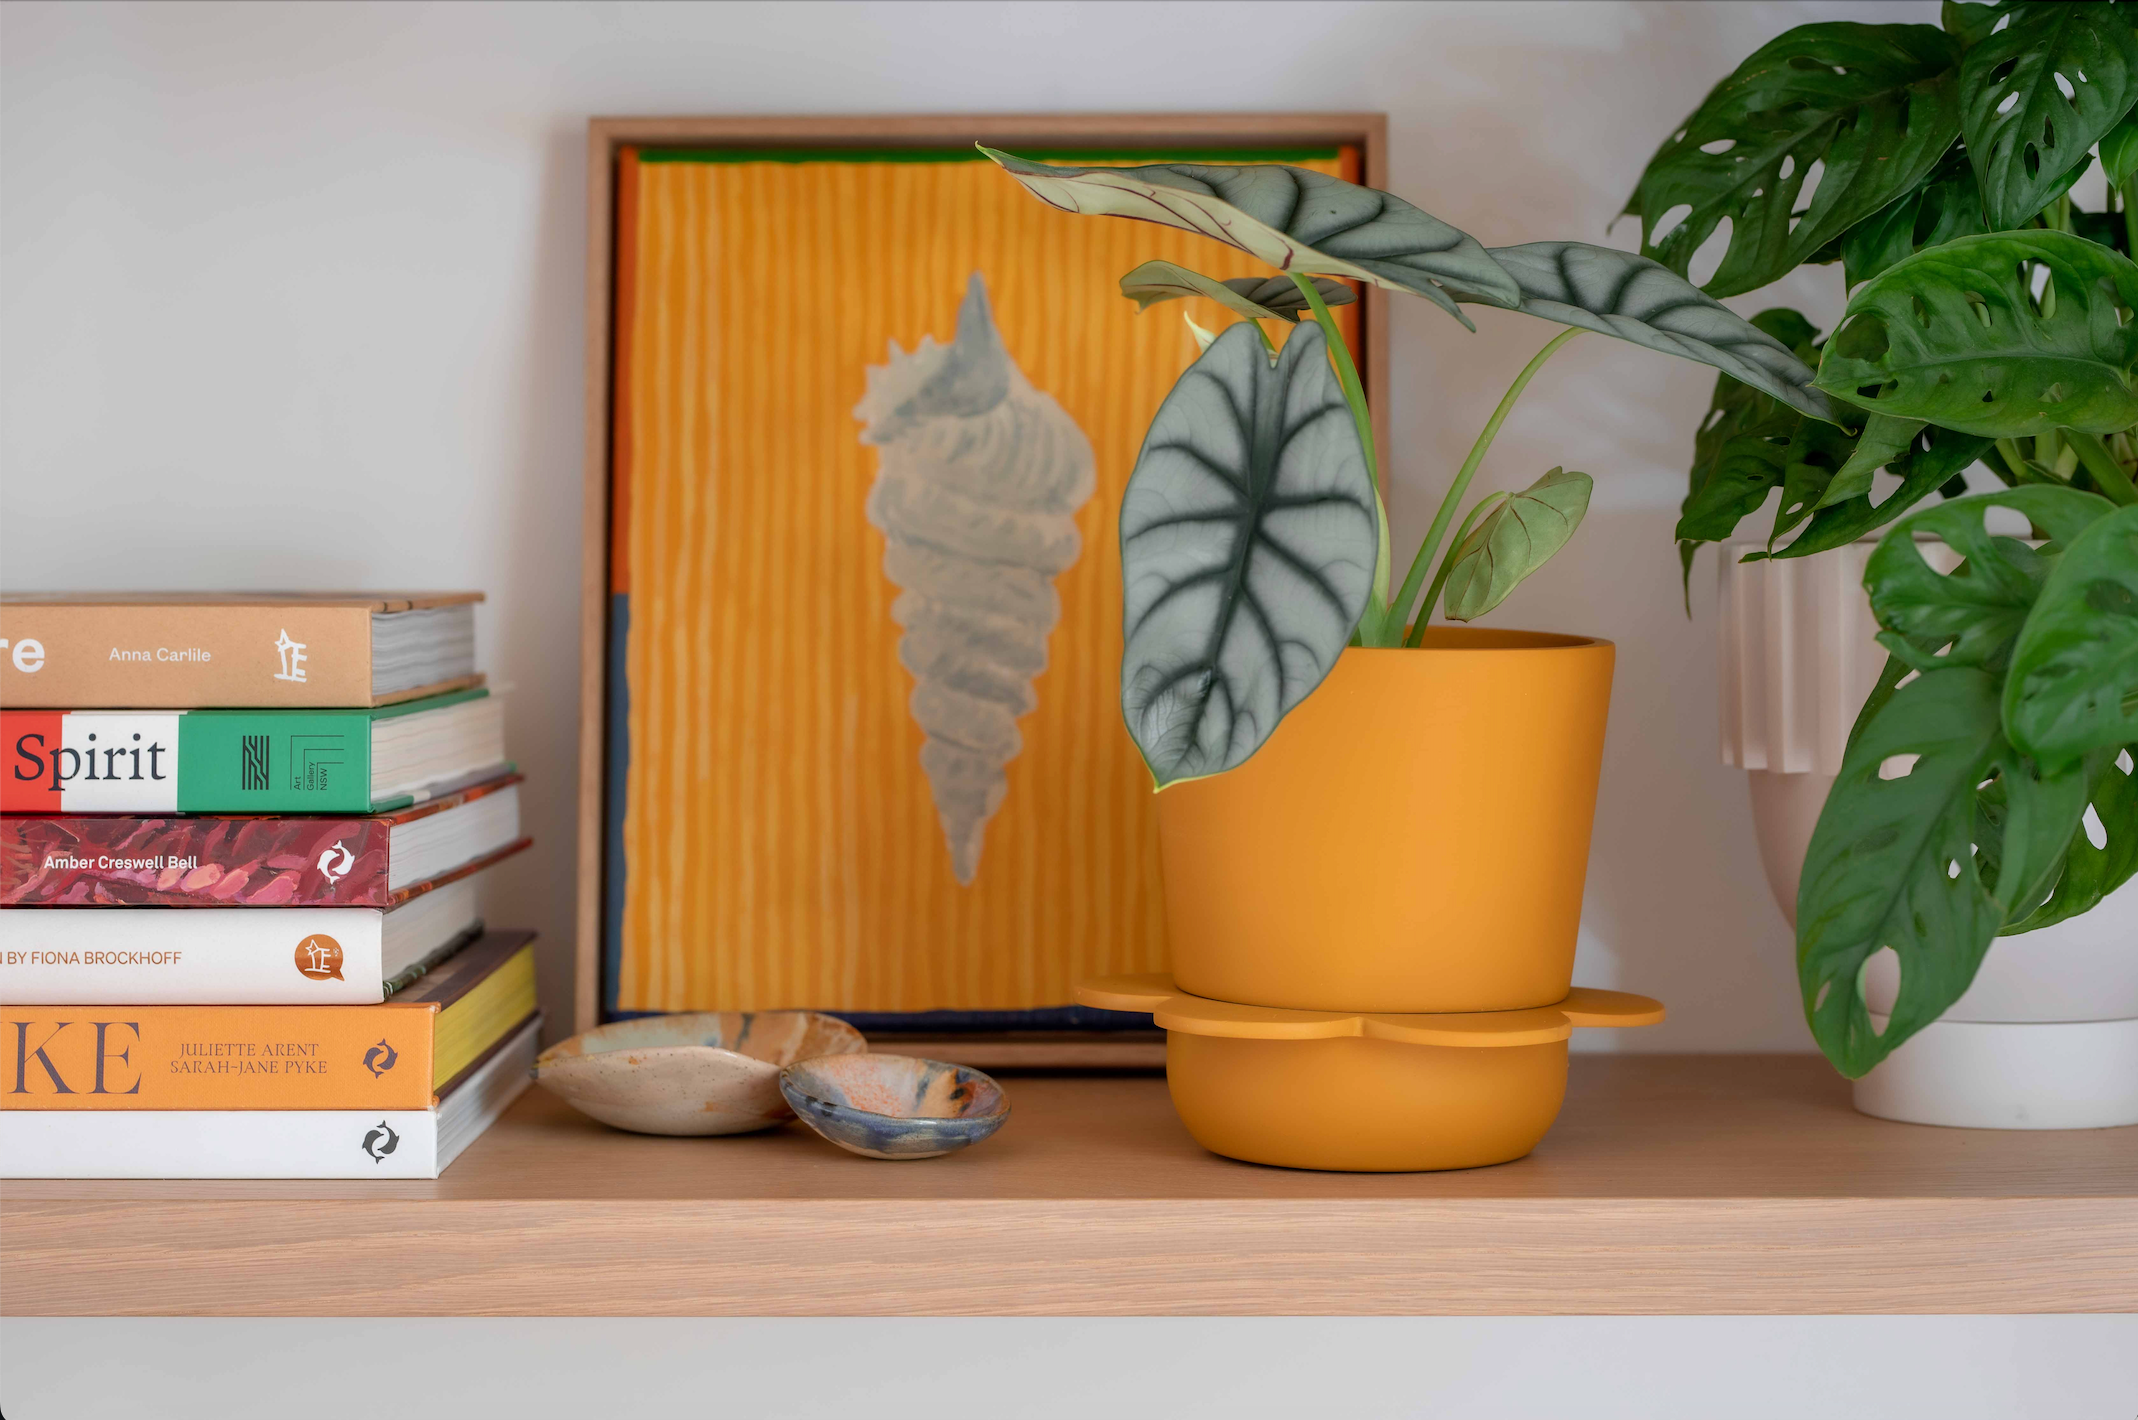 Shelf Styling with planters